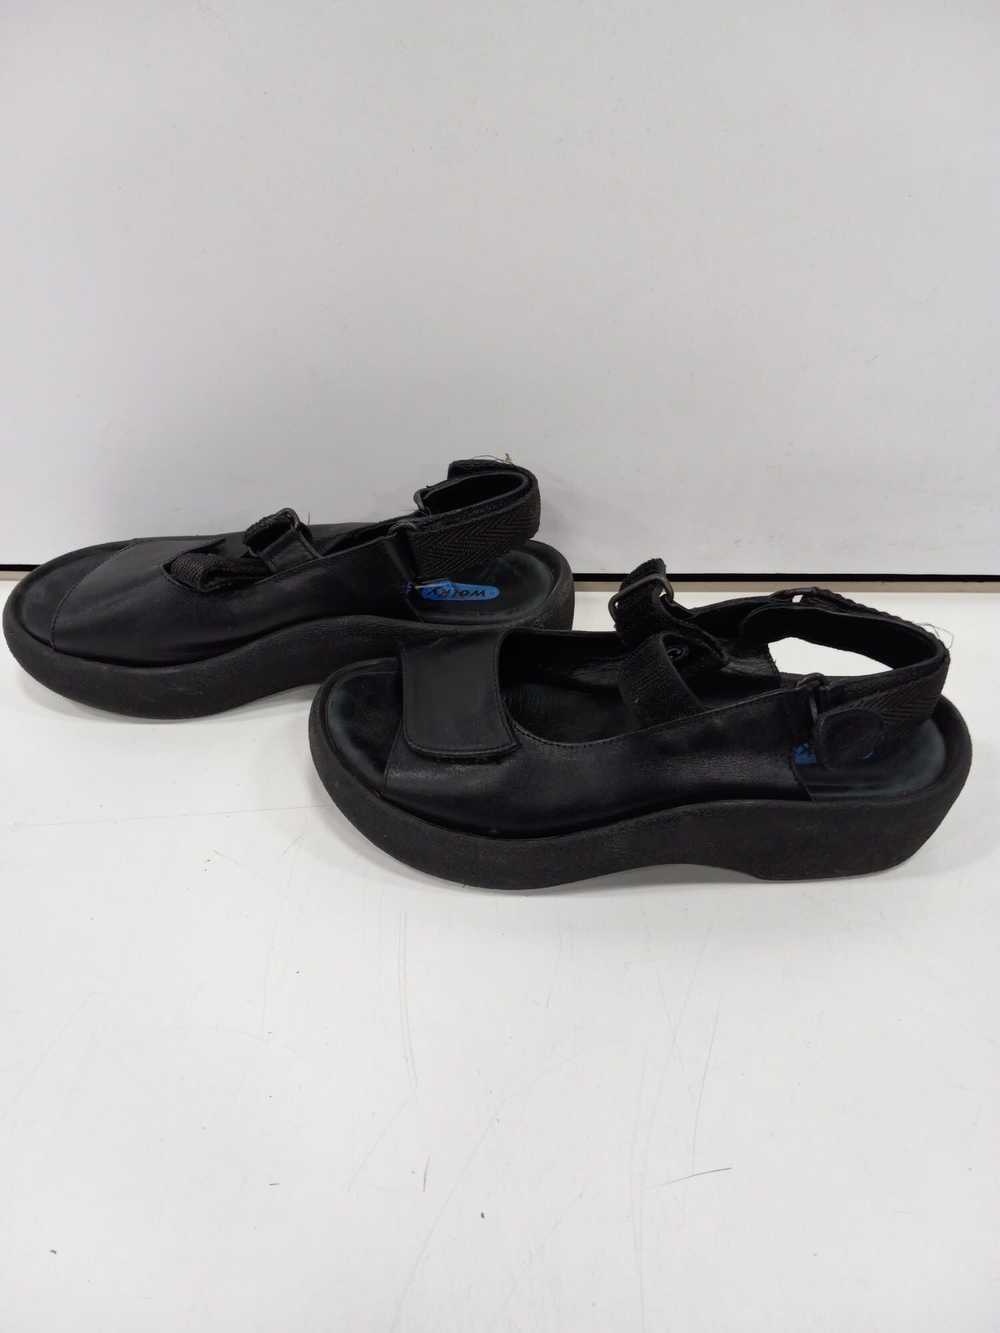 Wolky Women's Black Leather Sandals Size 37 - image 2